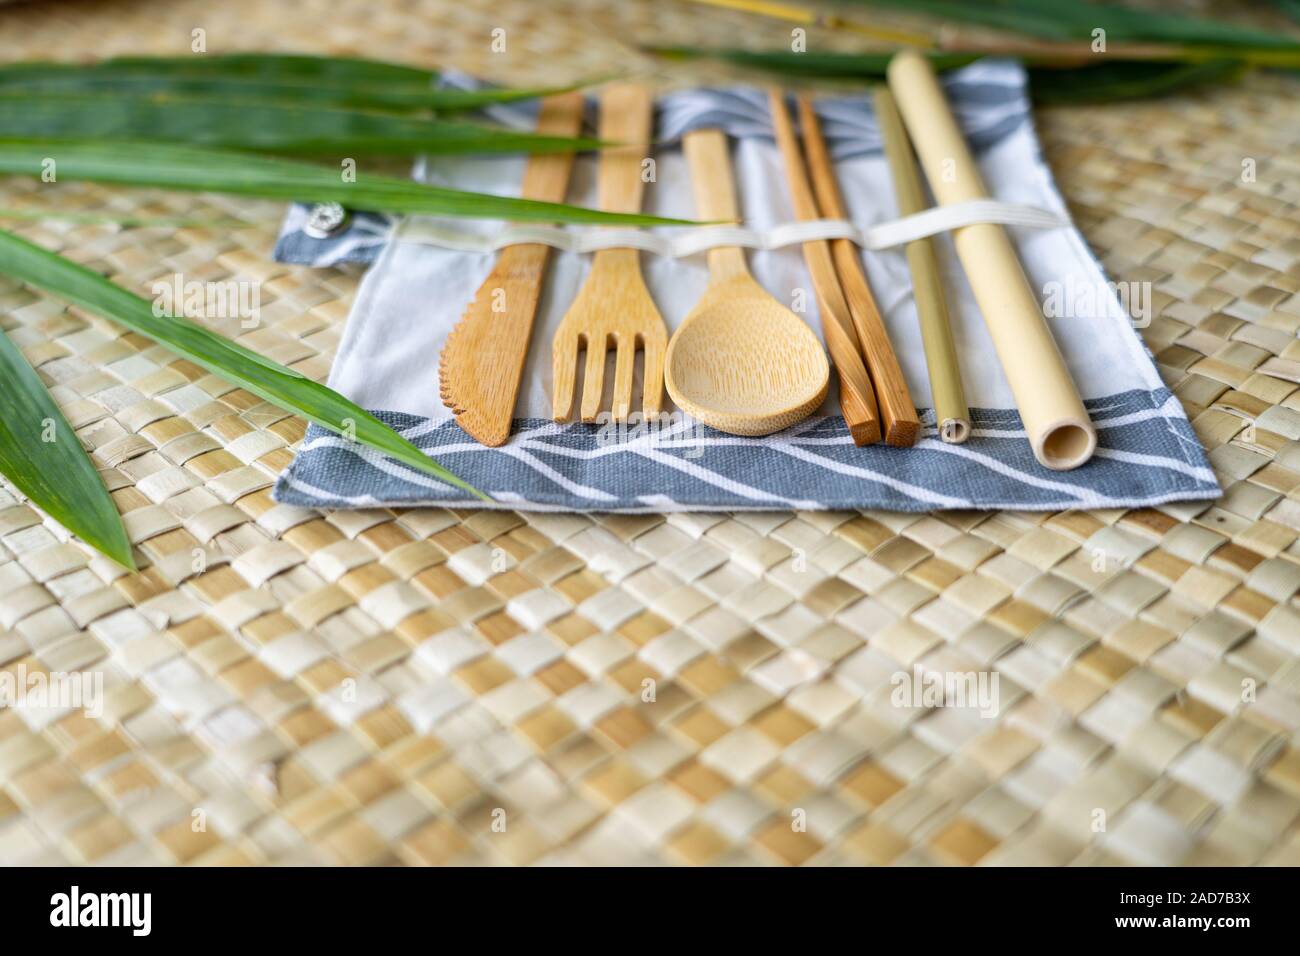 A biodegradable set of wooden utensils made in the Philippines from sustainable bamboo sources. Stock Photo